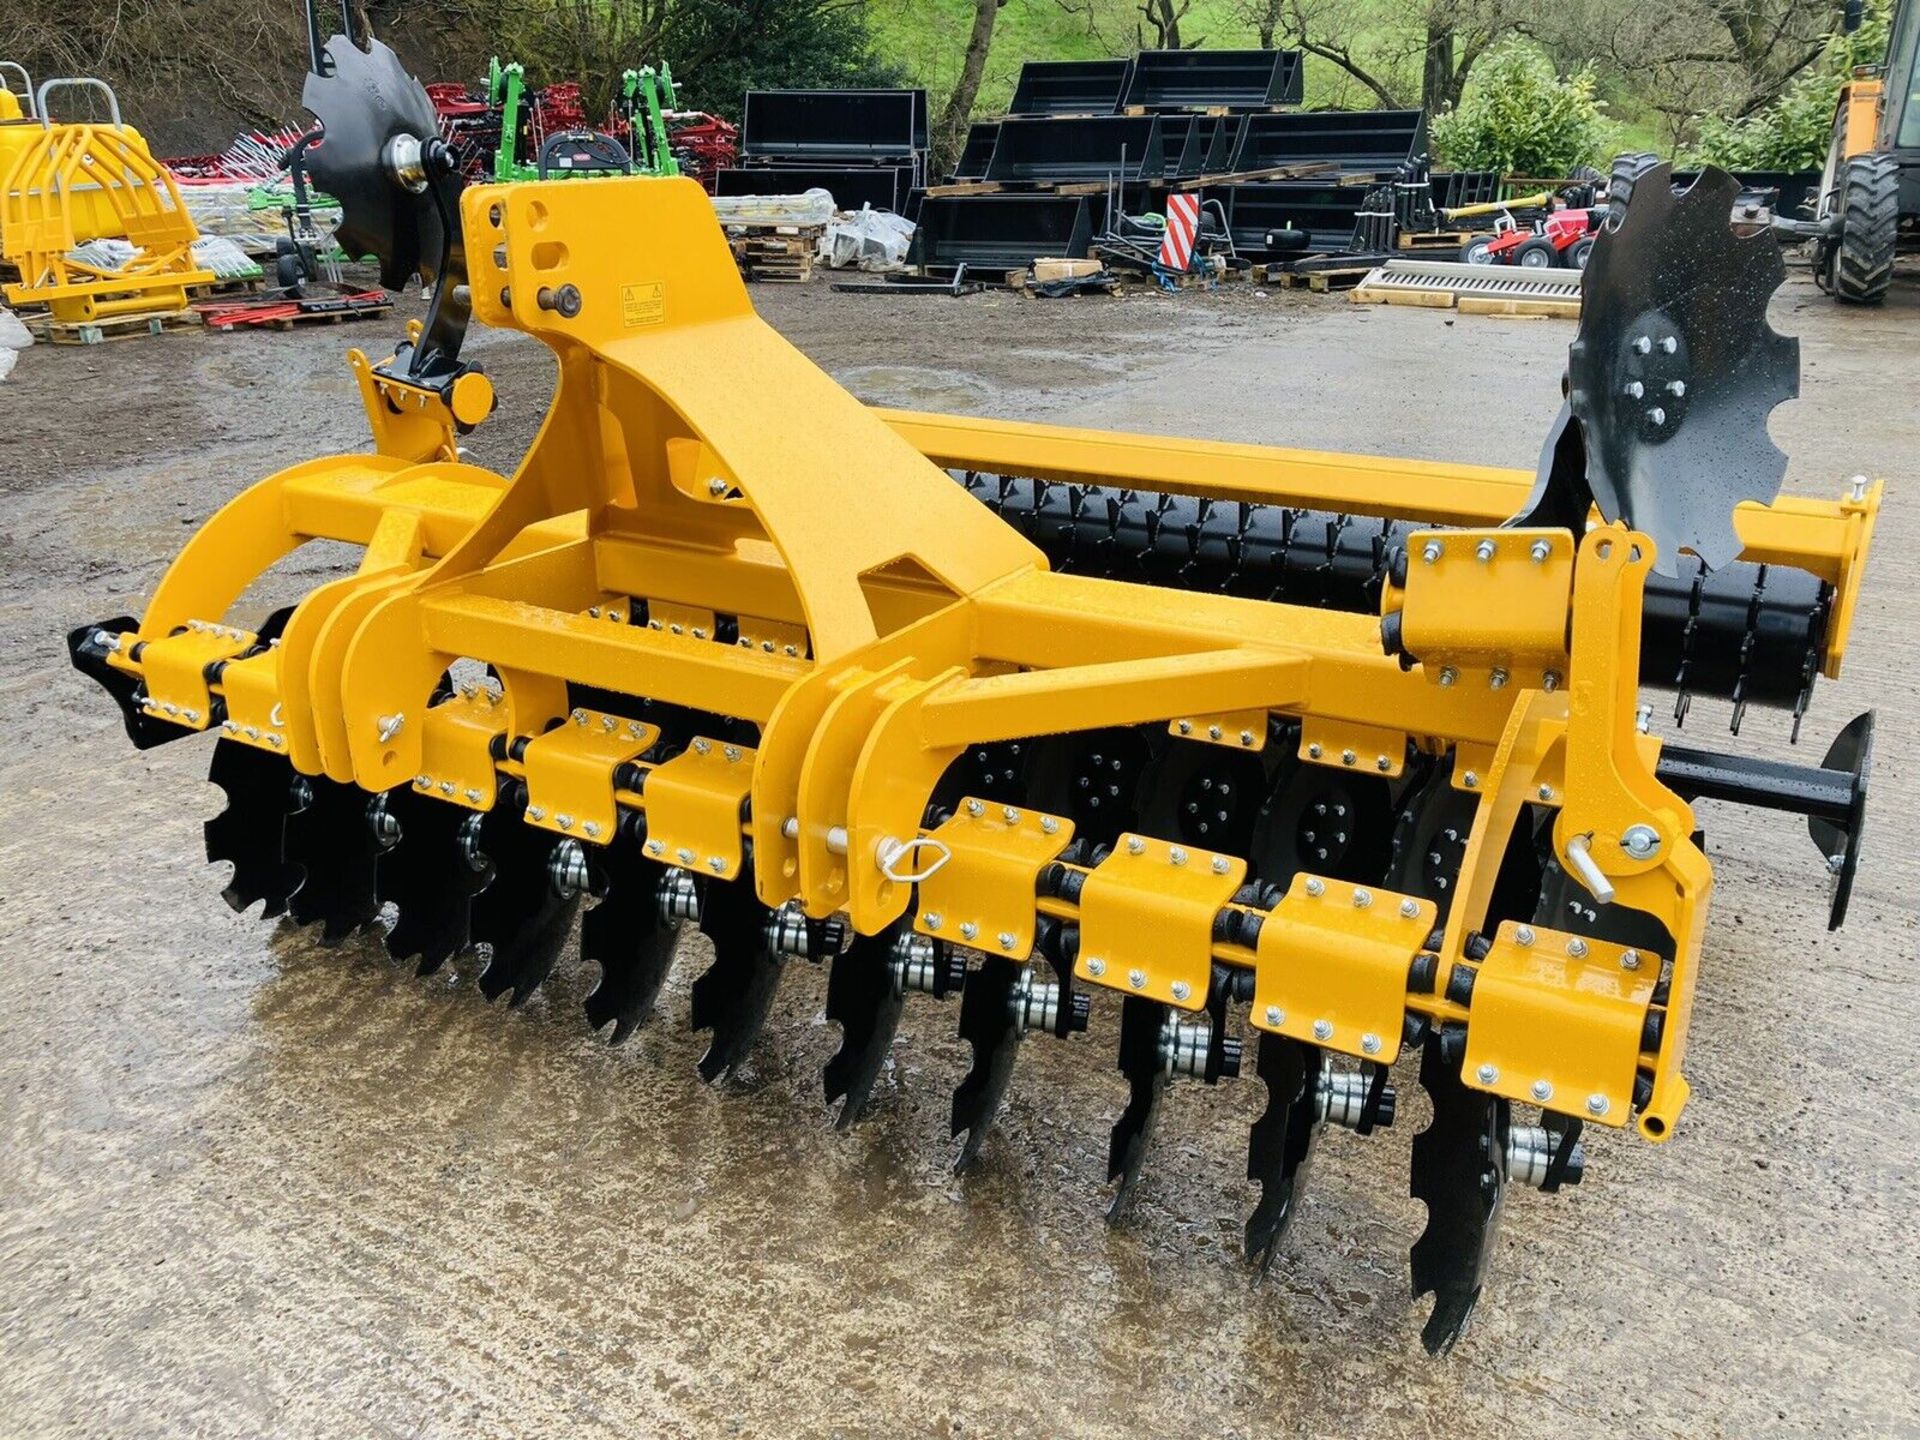 NEW 3M STALTECH DISC HARROWS500M ADJUSTABLE PACKER ROLLER WITH SCRAPERS - Image 15 of 15